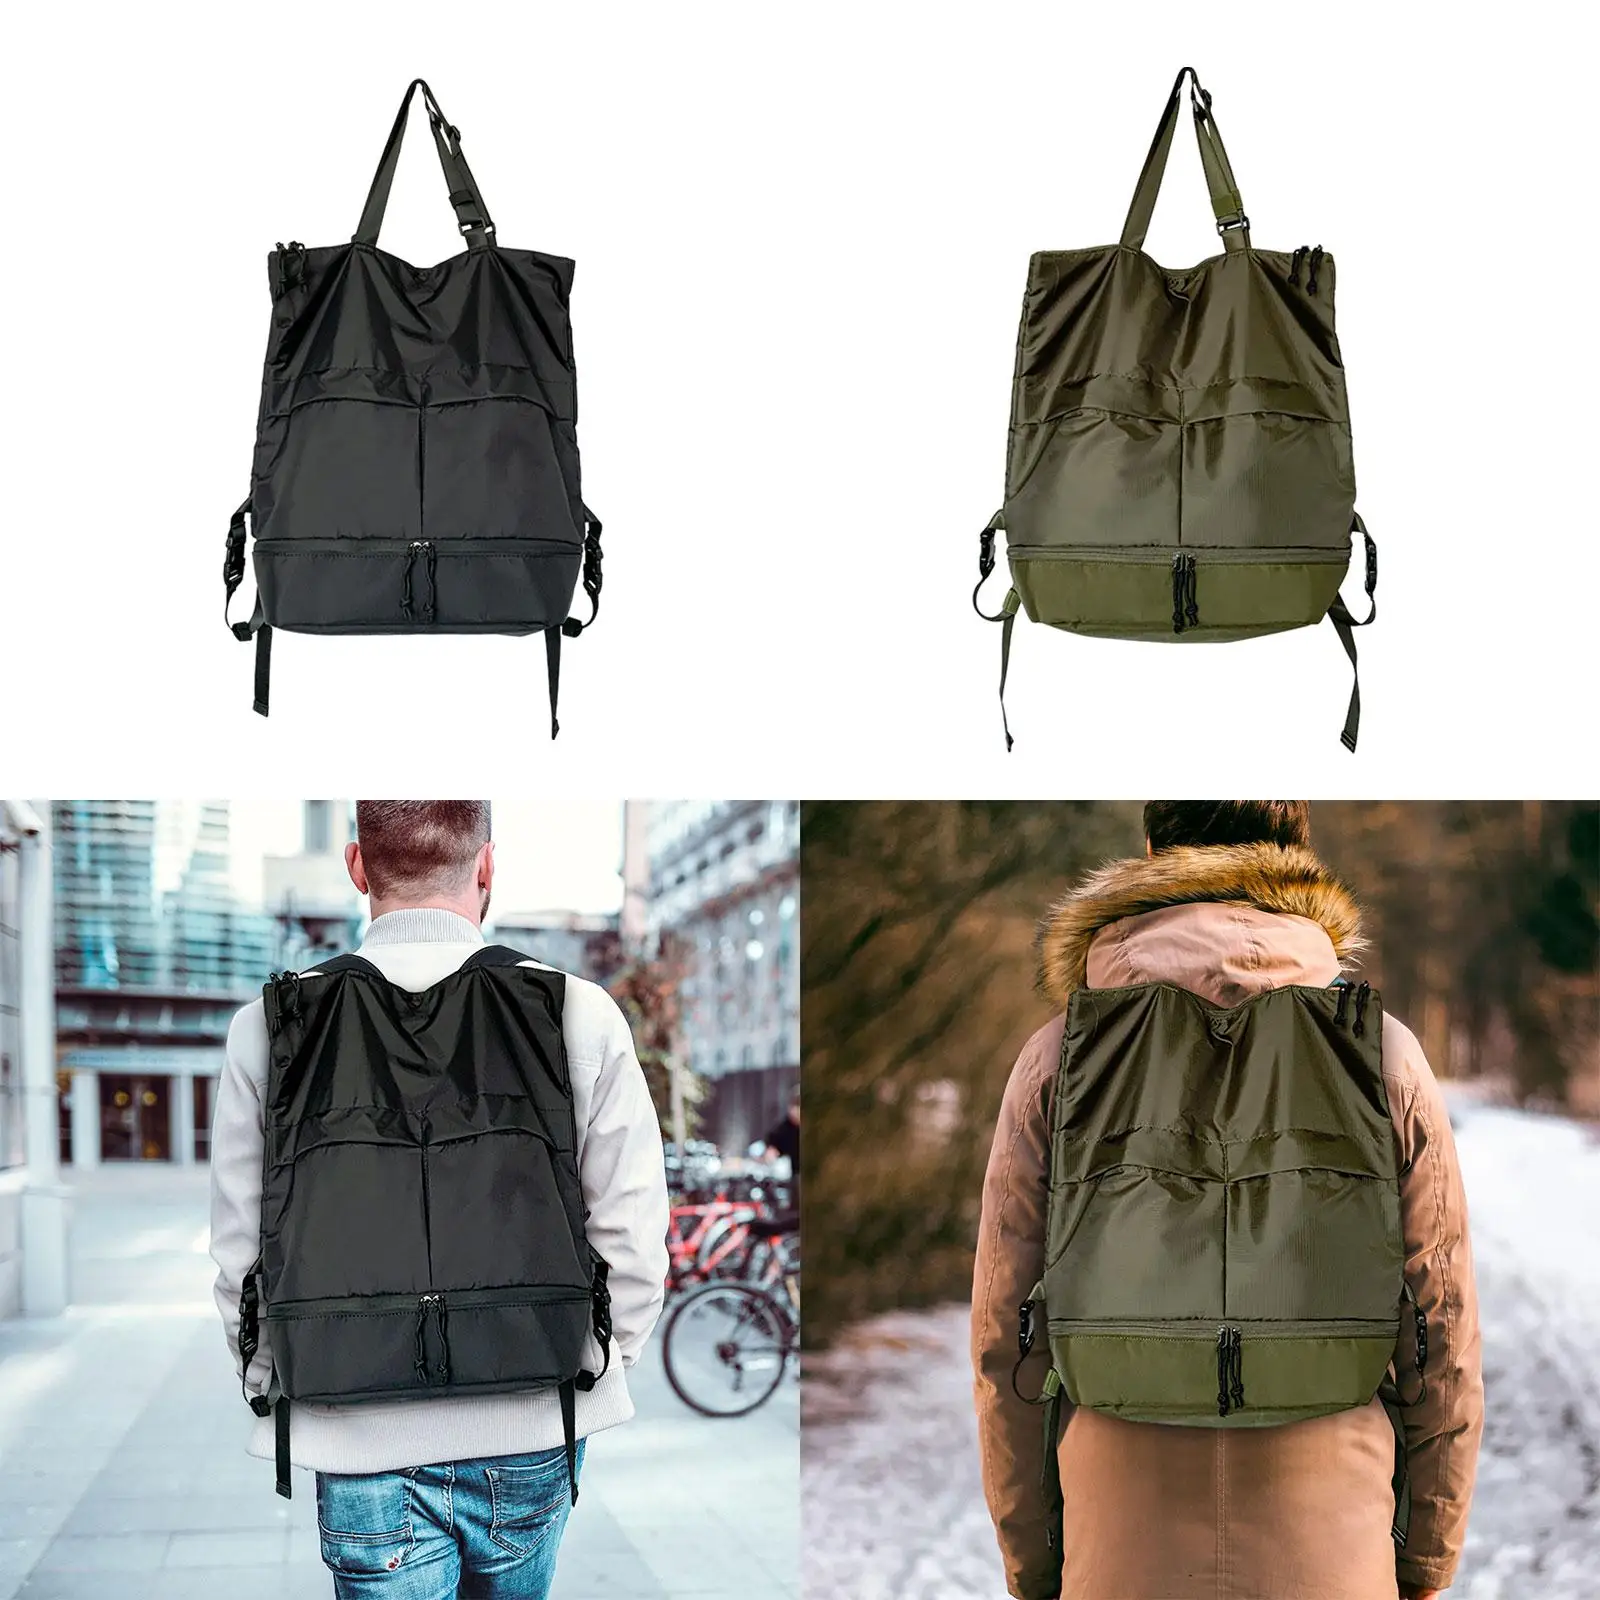 Backpack Fashion Trendy Casual Durable Portable Multiple Pockets Daypack for Hiking Climbing Outdoor Indoor Backpacking Party